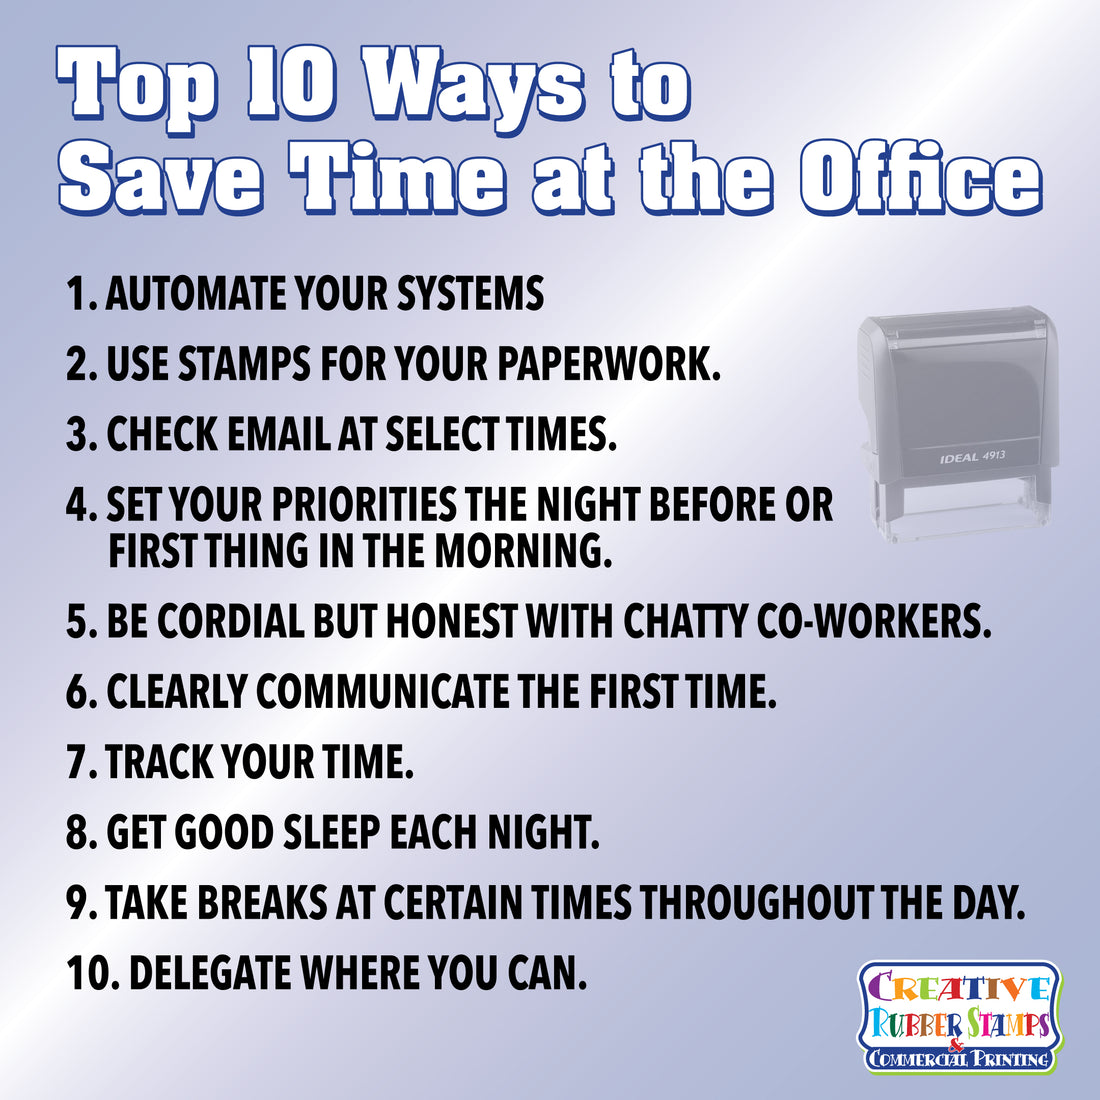 Top 10 Ways to Save Time at the Office